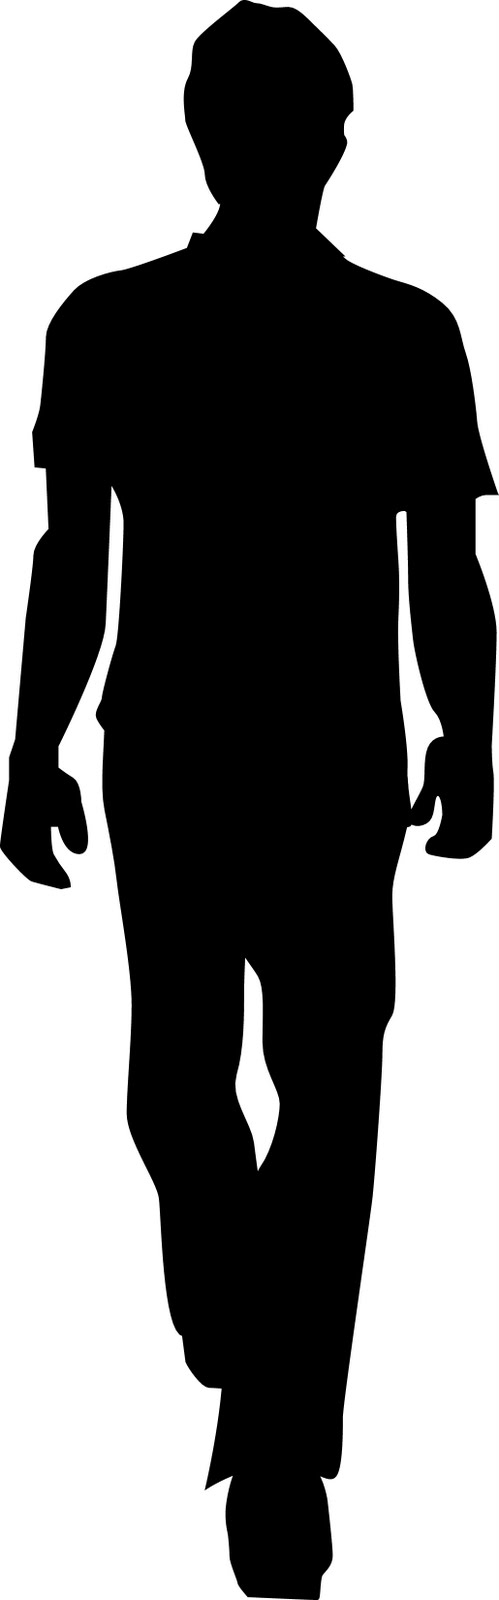 Silhouette Person - ClipArt Best